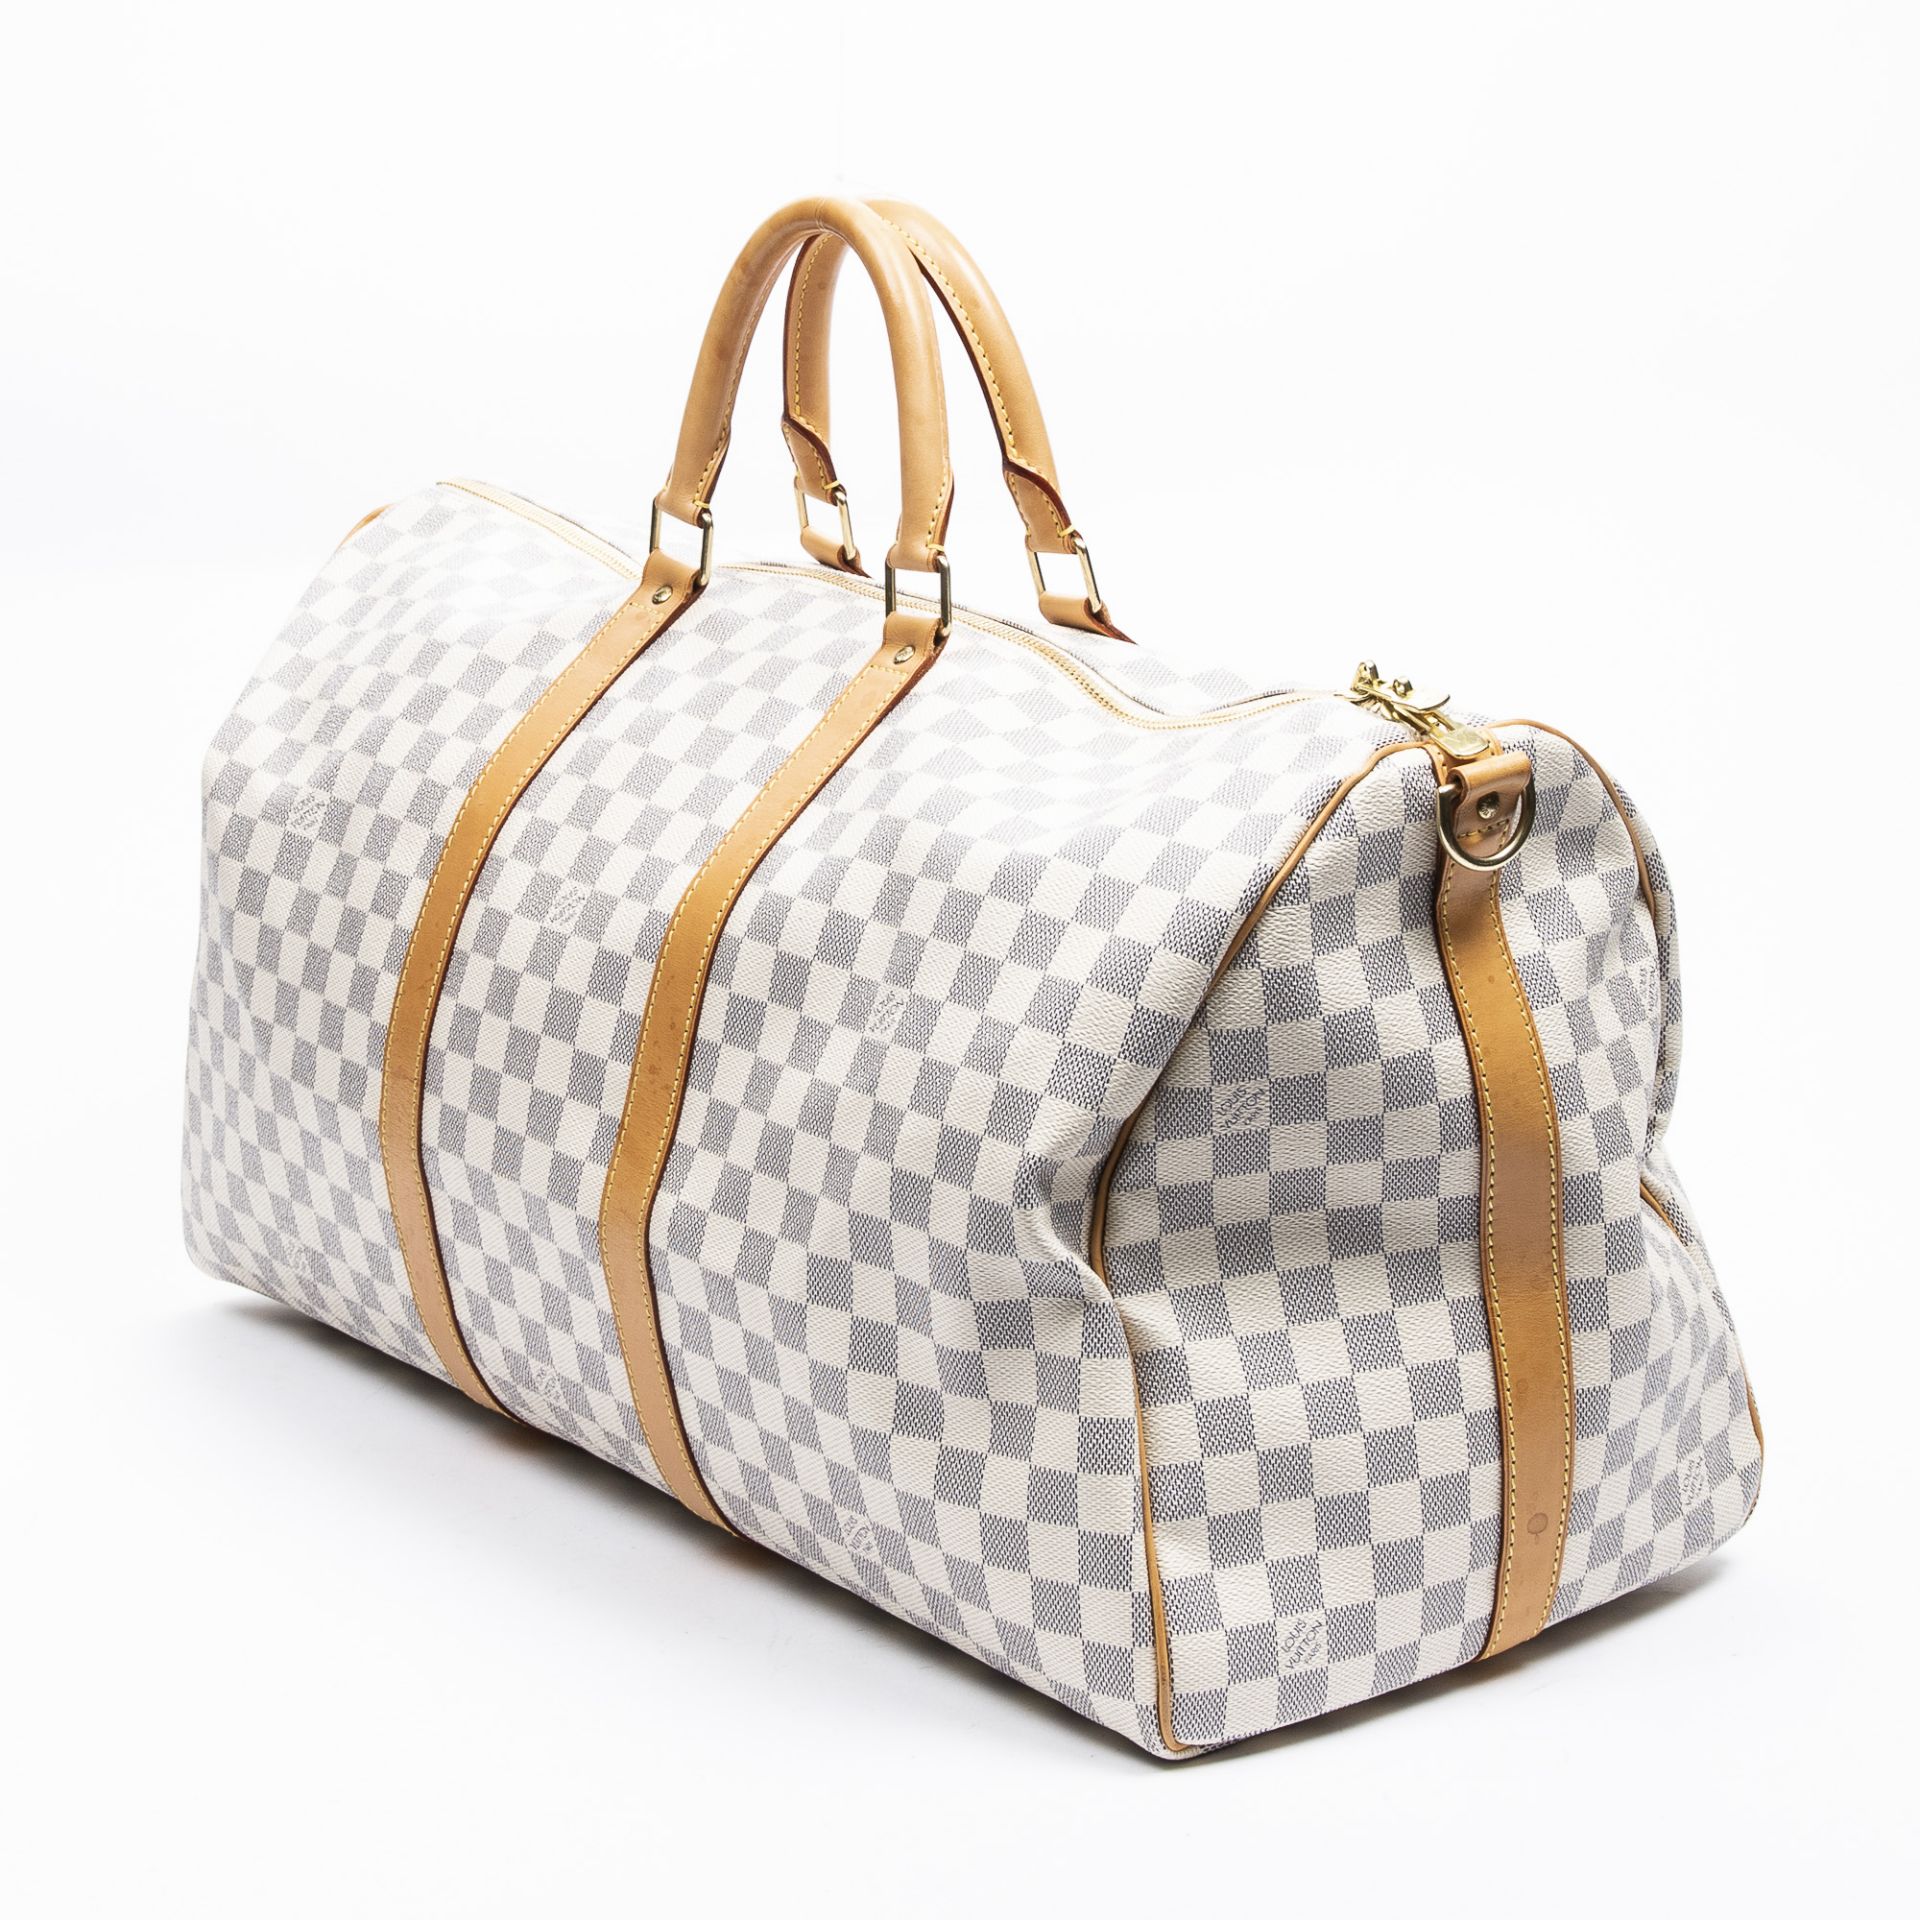 RRP £1,300.00 Lot To Contain 1 Louis Vuitton Coated Canvas Keepall Bandouliere Shoulder Bag In Ivory - Image 2 of 3